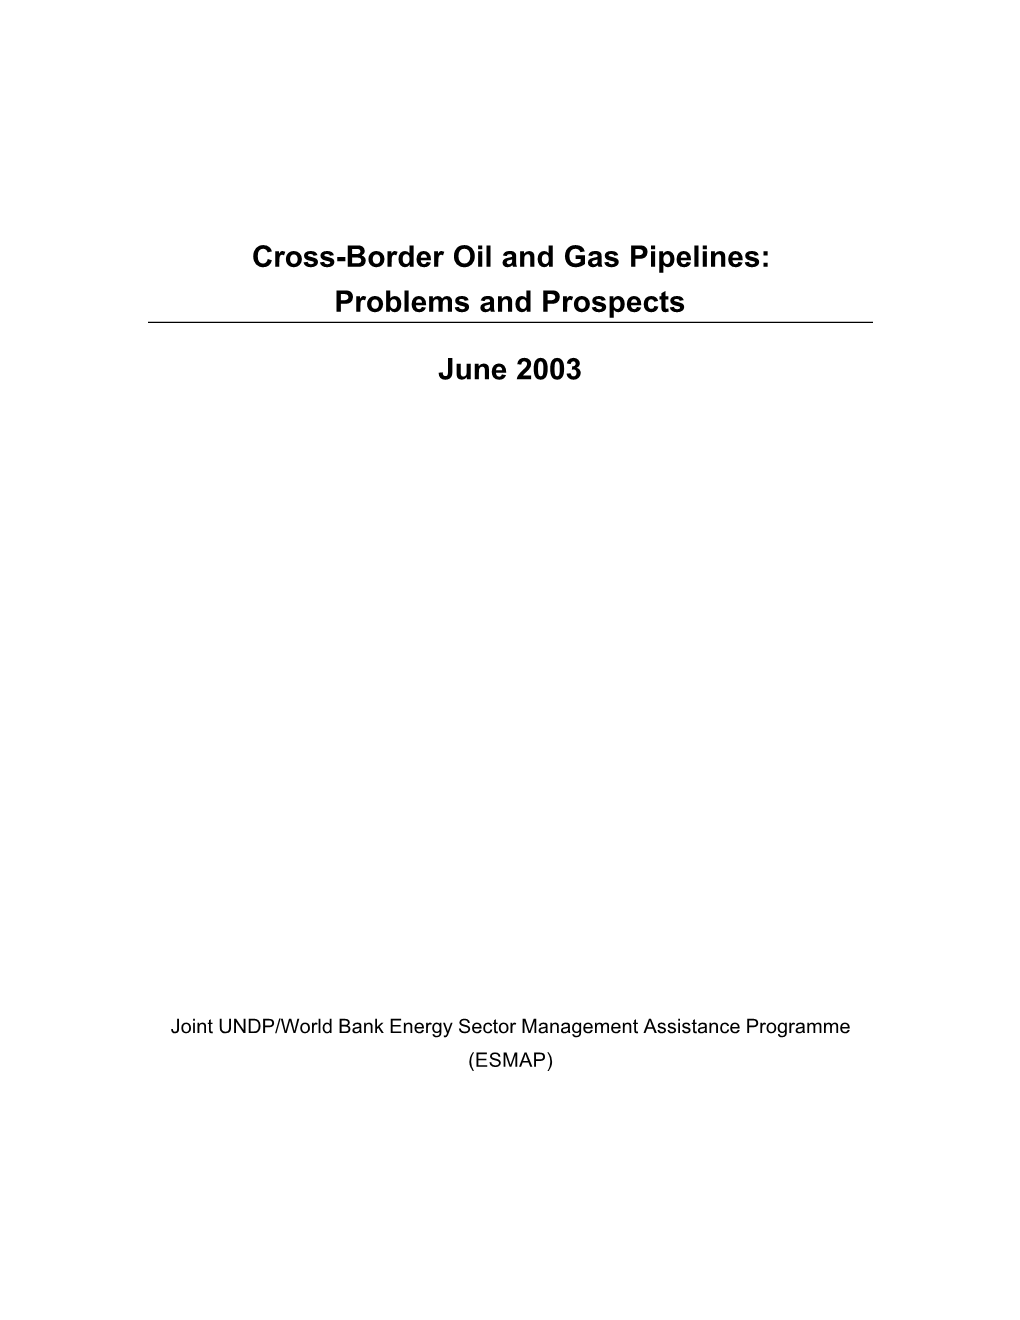 Cross-Border Oil and Gas Pipelines: Problems and Prospects